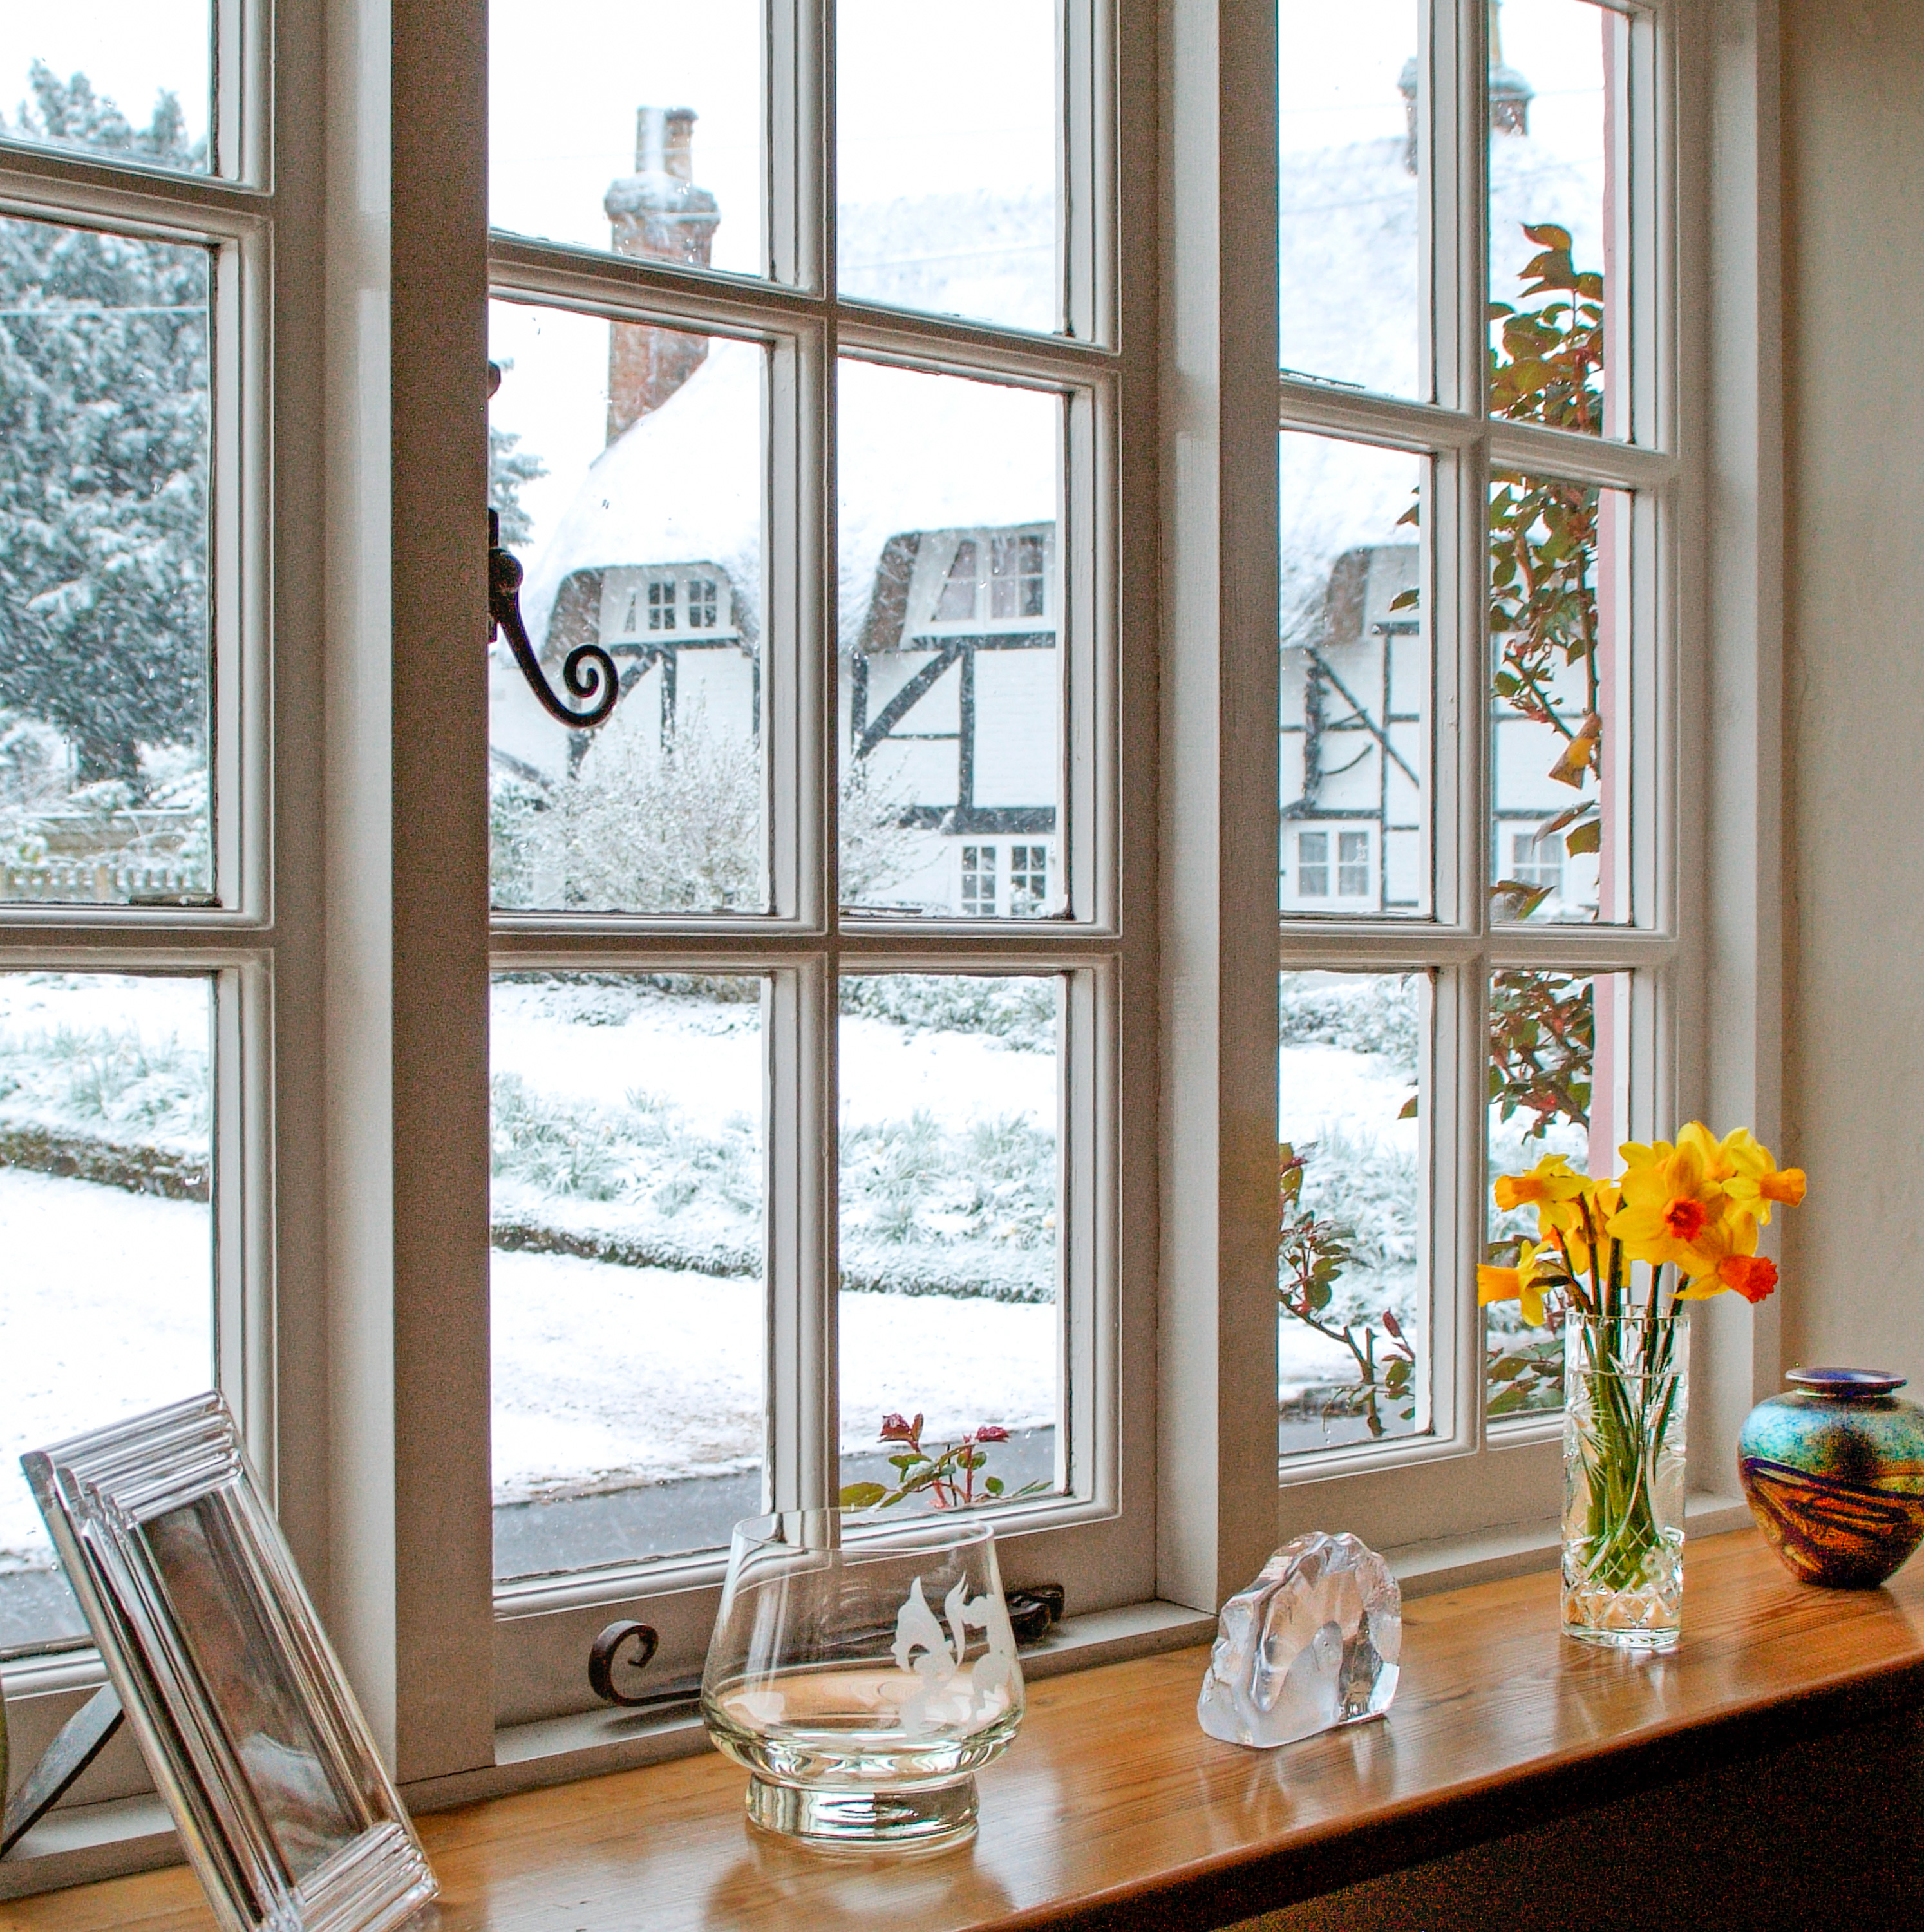 White framed windows with view of snow outside.